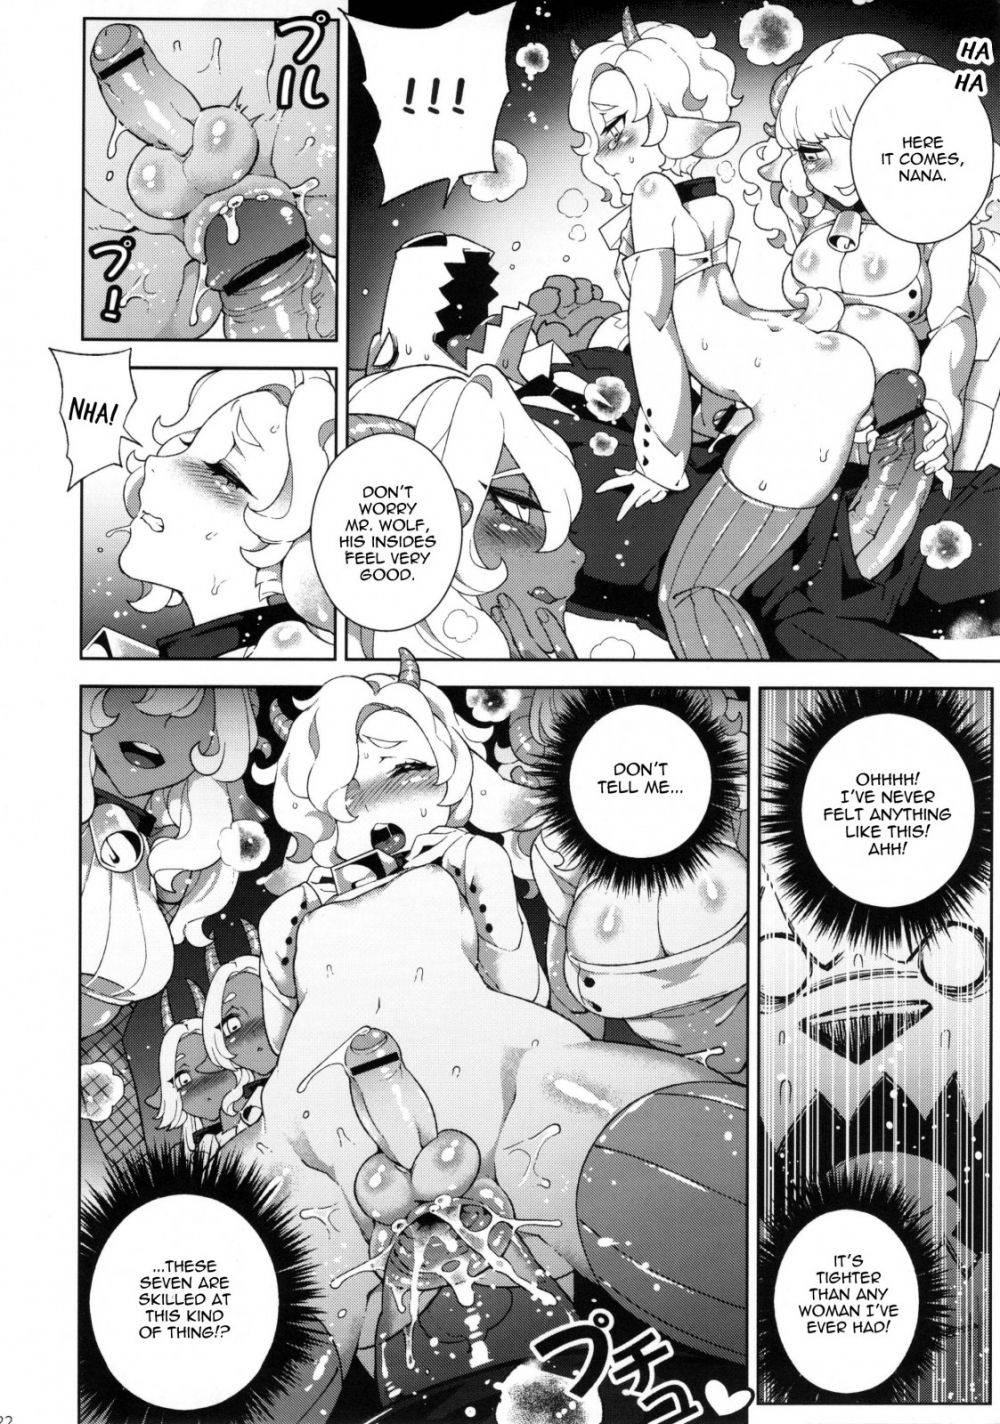 Original Series Hentai Comic The Wolf and the Seven Young Goats.